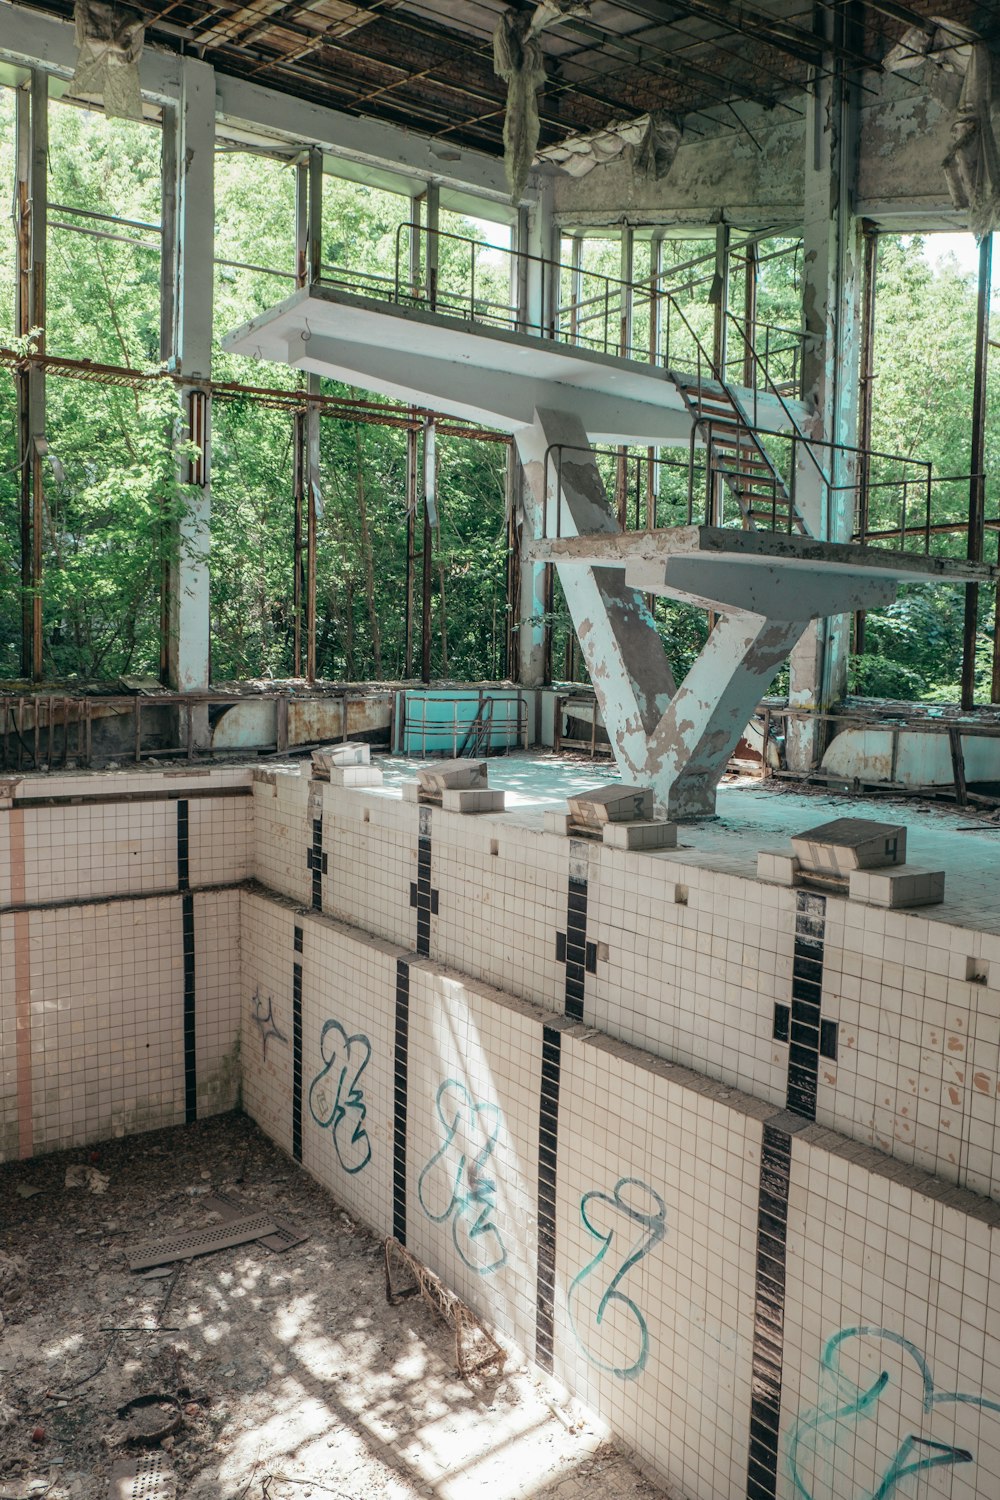 an abandoned swimming pool with graffiti on the walls